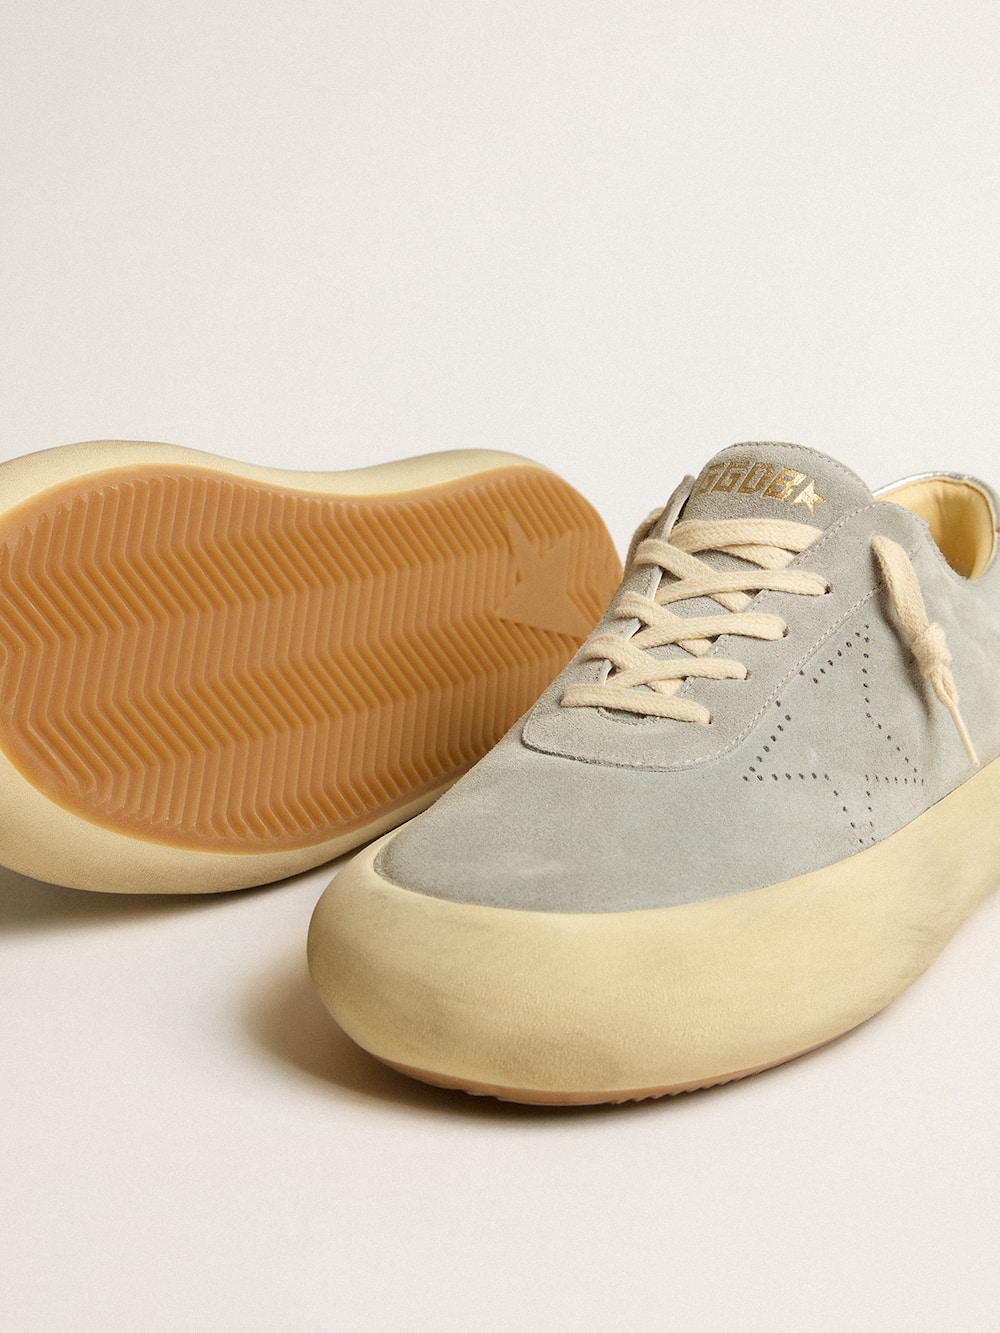 Golden Goose - Men's Space-Star shoes in ice-gray suede with perforated star in 